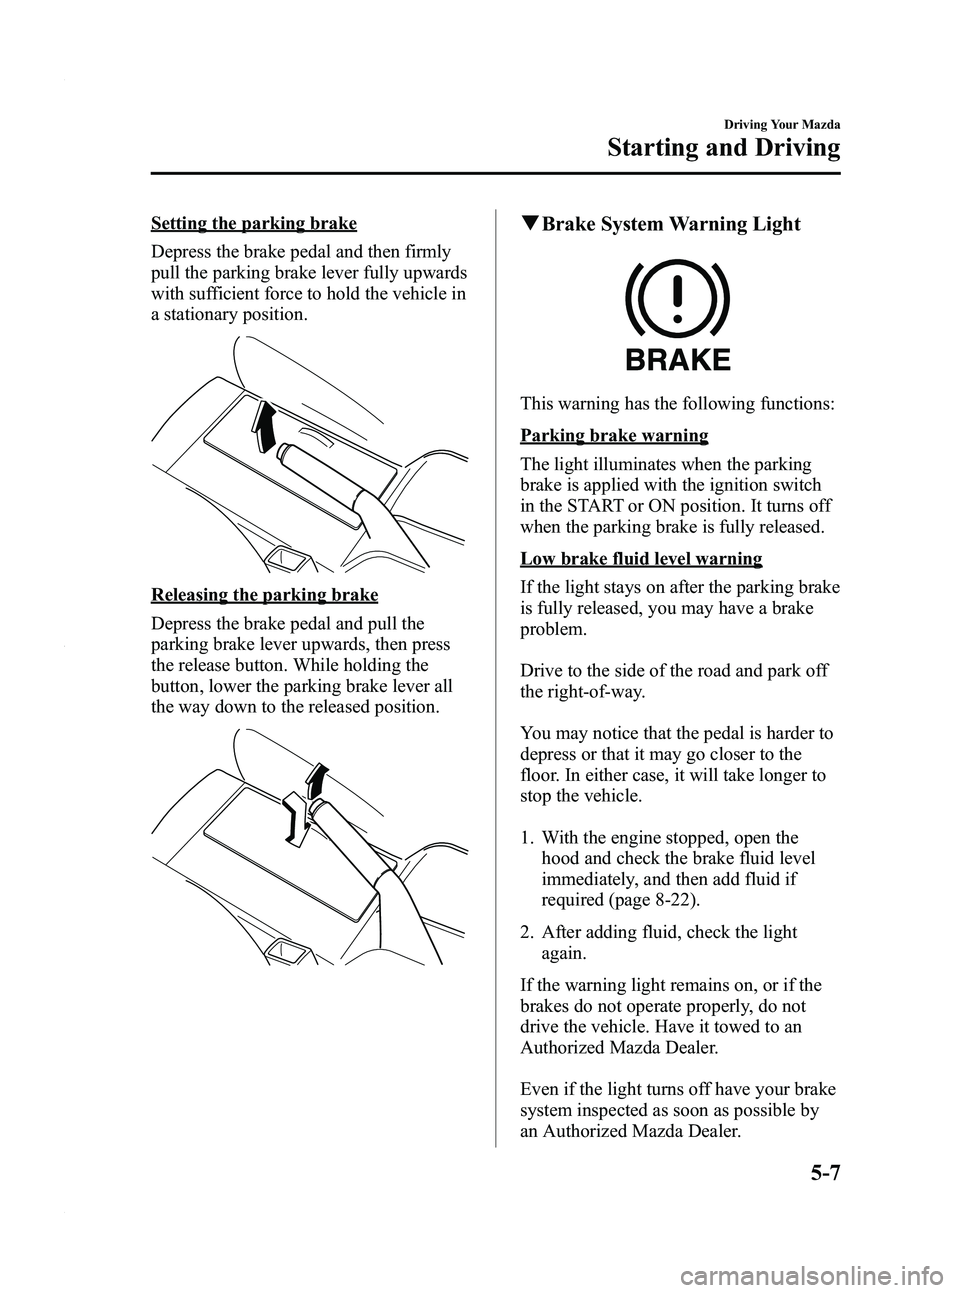 MAZDA MODEL 5 2010  Owners Manual Black plate (115,1)
Setting the parking brake
Depress the brake pedal and then firmly
pull the parking brake lever fully upwards
with sufficient force to hold the vehicle in
a stationary position.
Rel